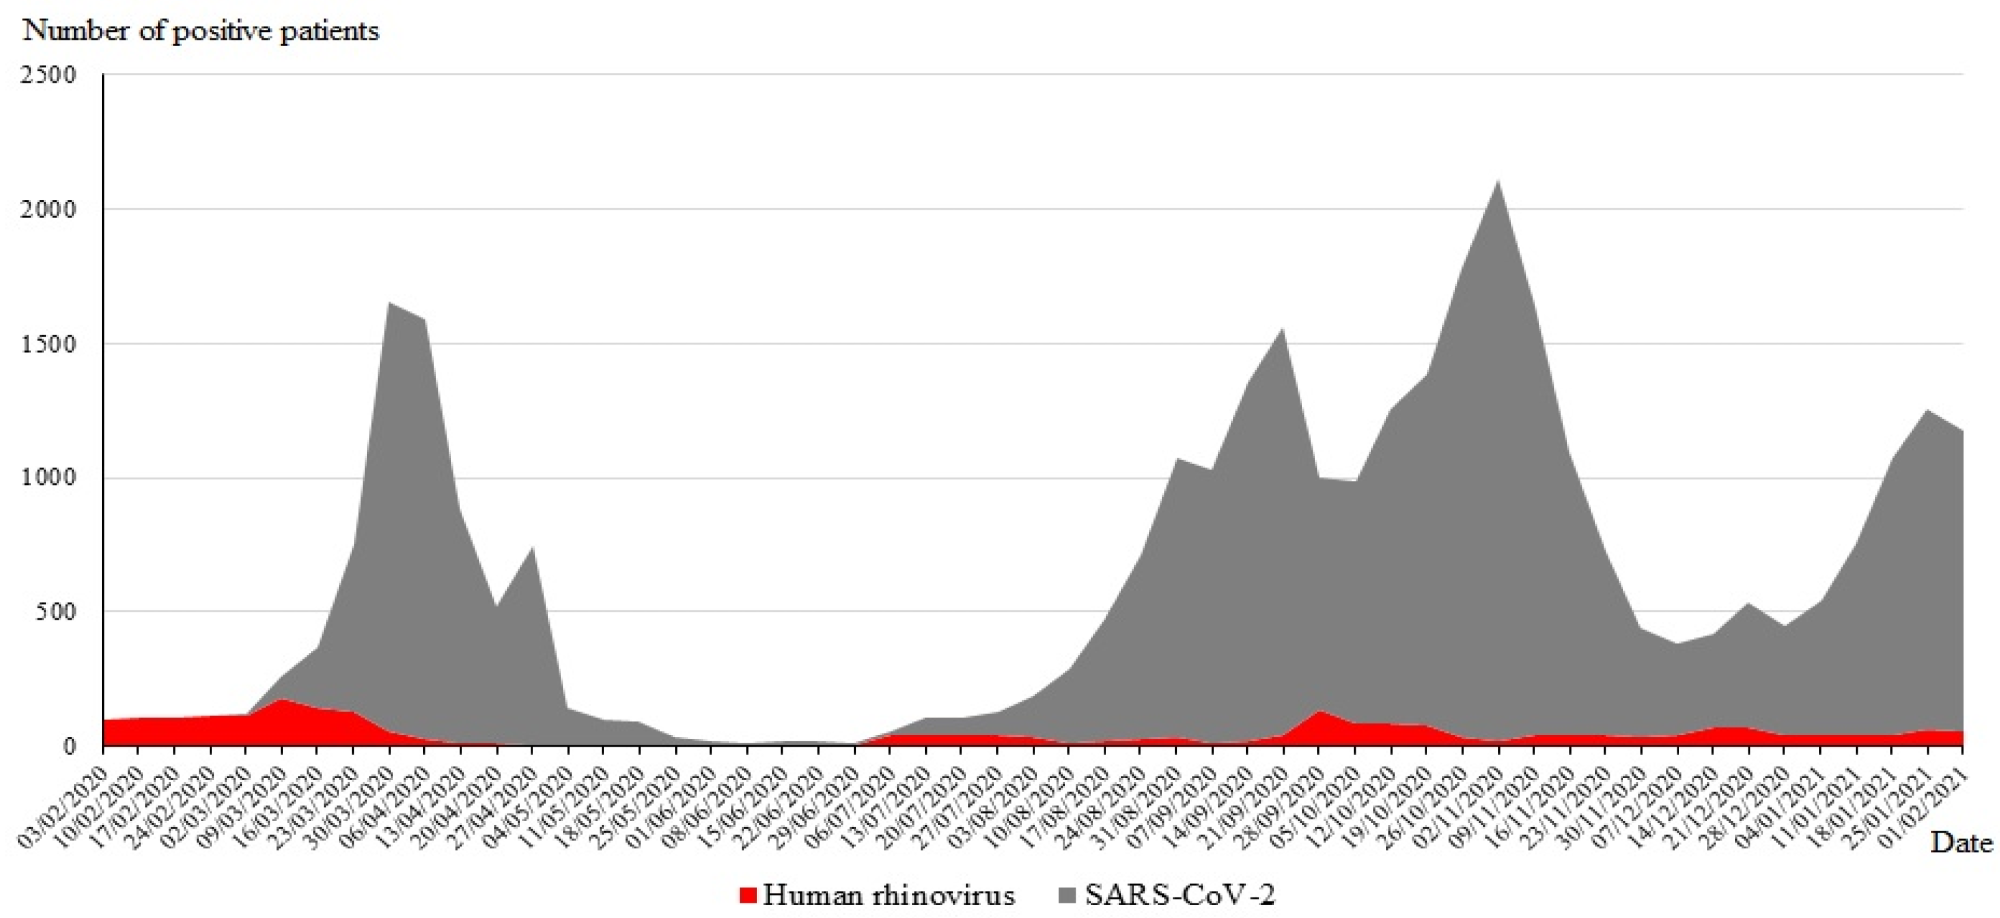 Temporal distribution of the SARS-CoV-2 and HRV diagnoses from 1 March 2020 to 28 February 2021.